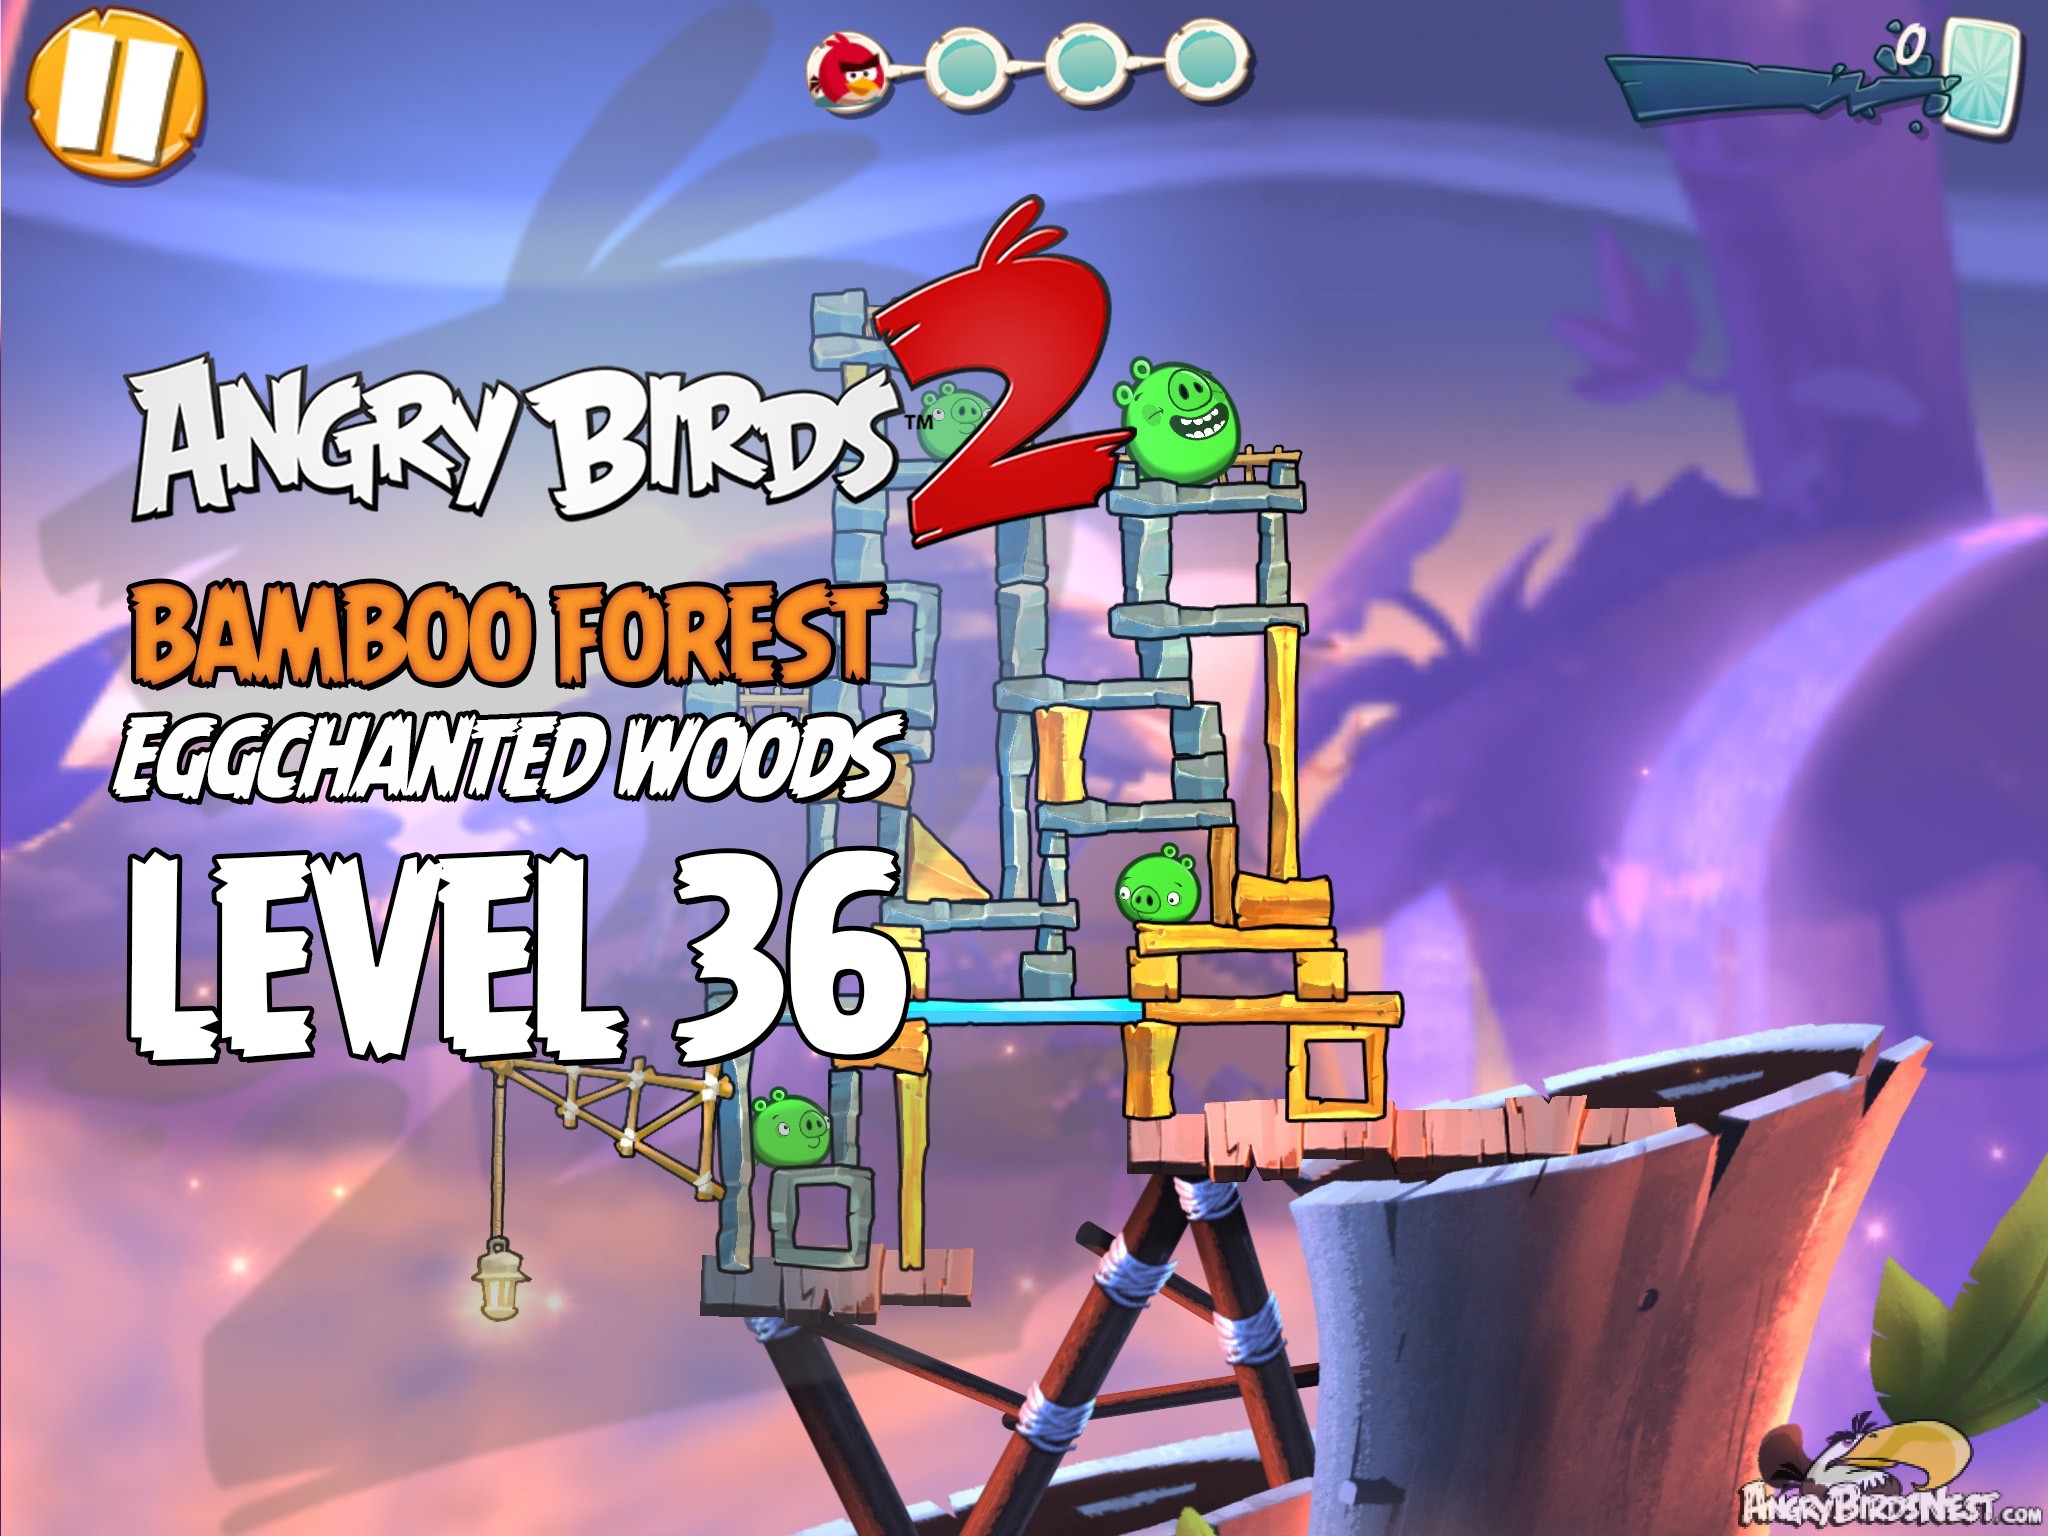 Angry Birds 2 Bamboo Forest Eggchanted Woods Level 36